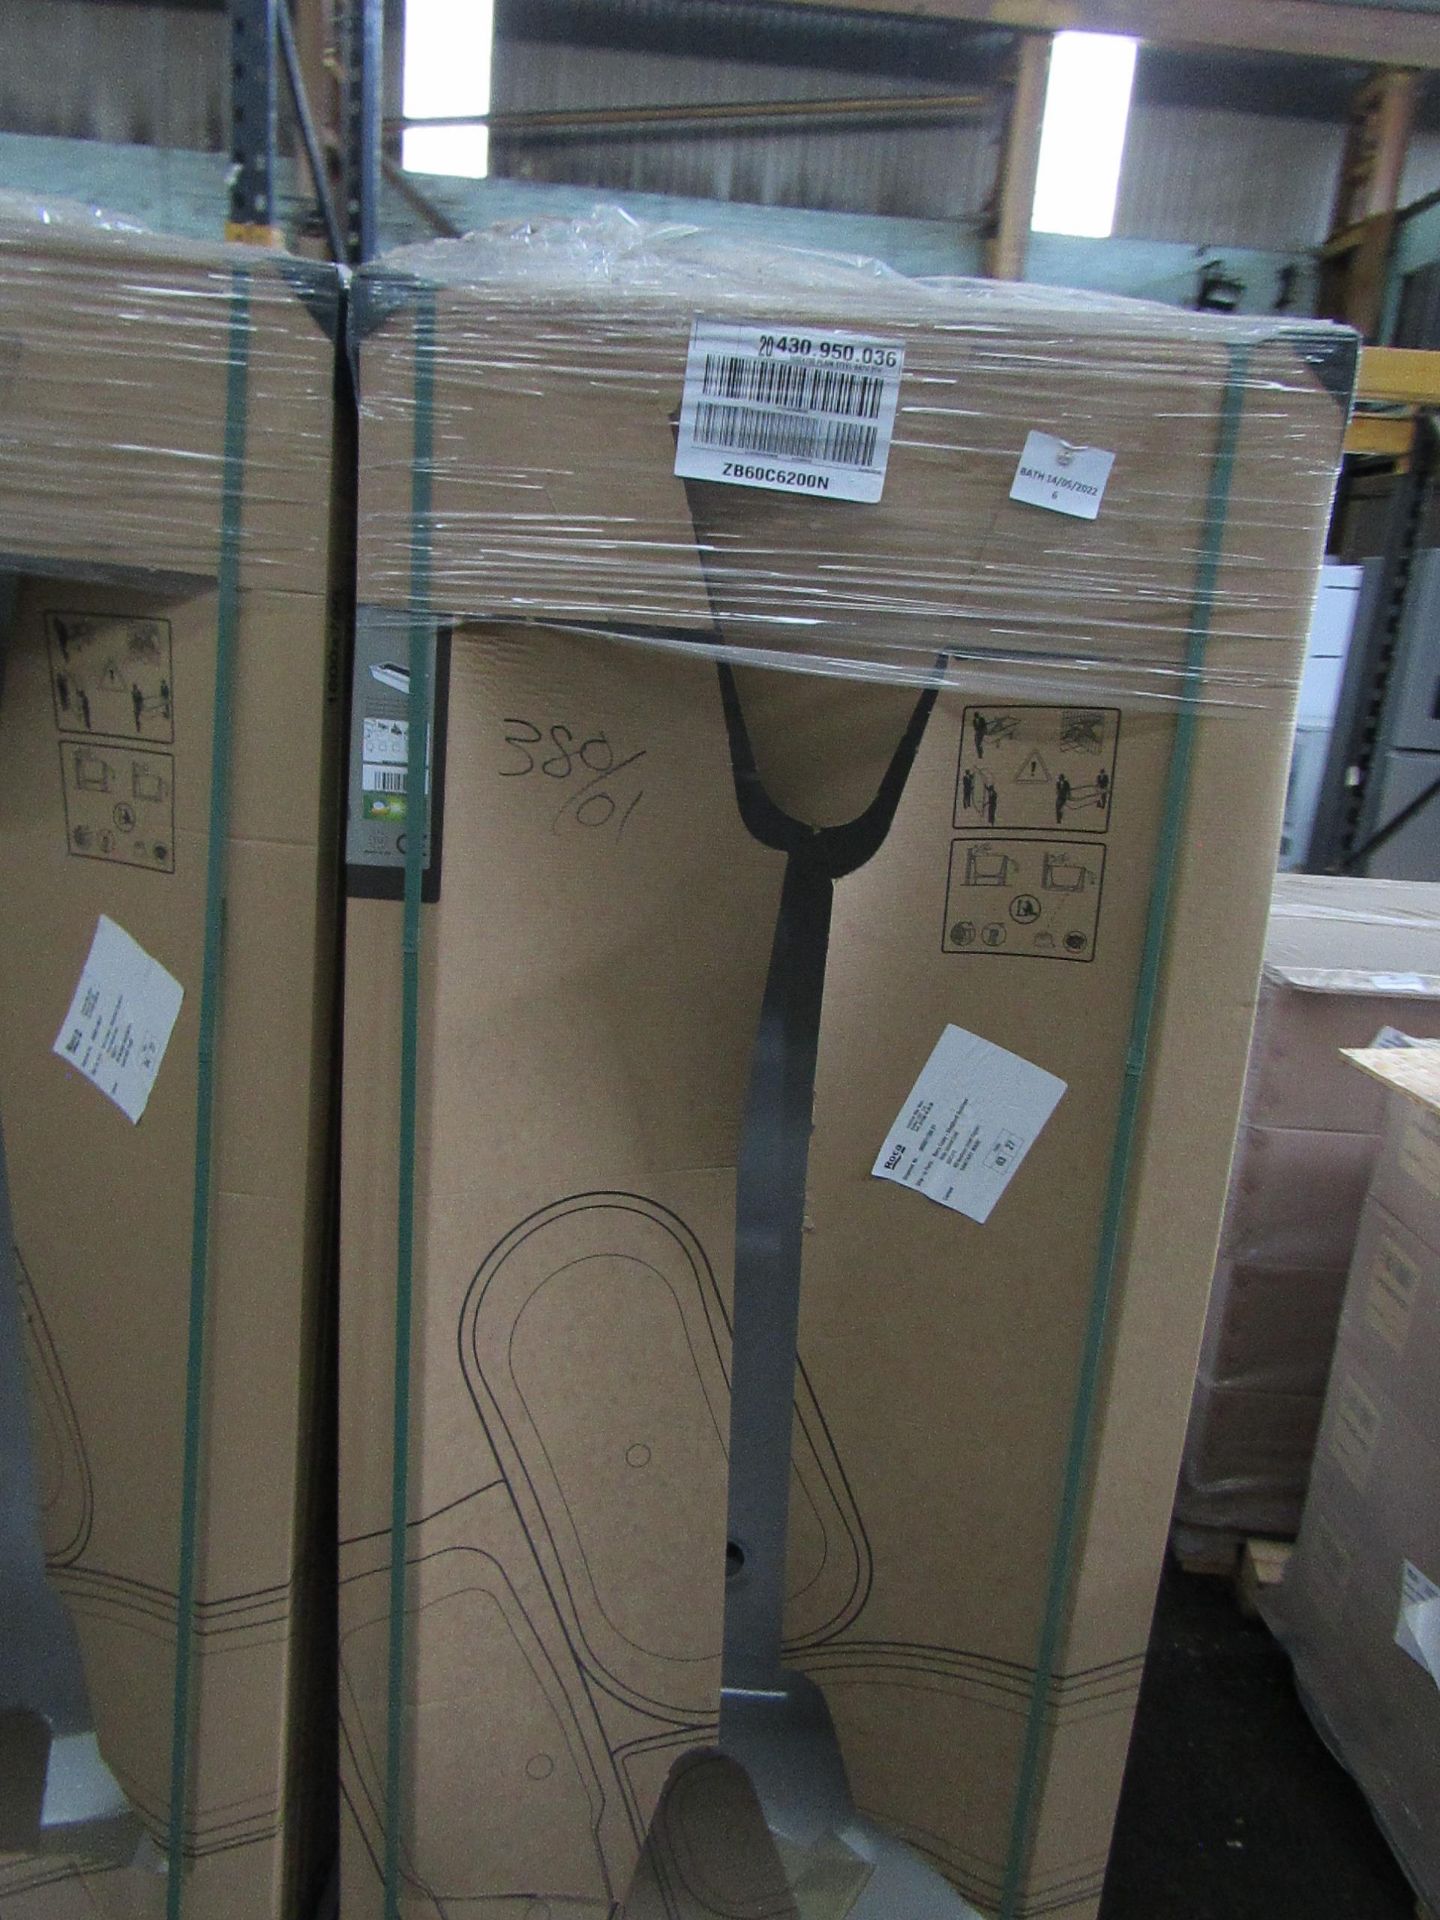 Pallet of 20x unbranded Roca 1600x700 steel baths, new. Come with feet, RRP ?120 each